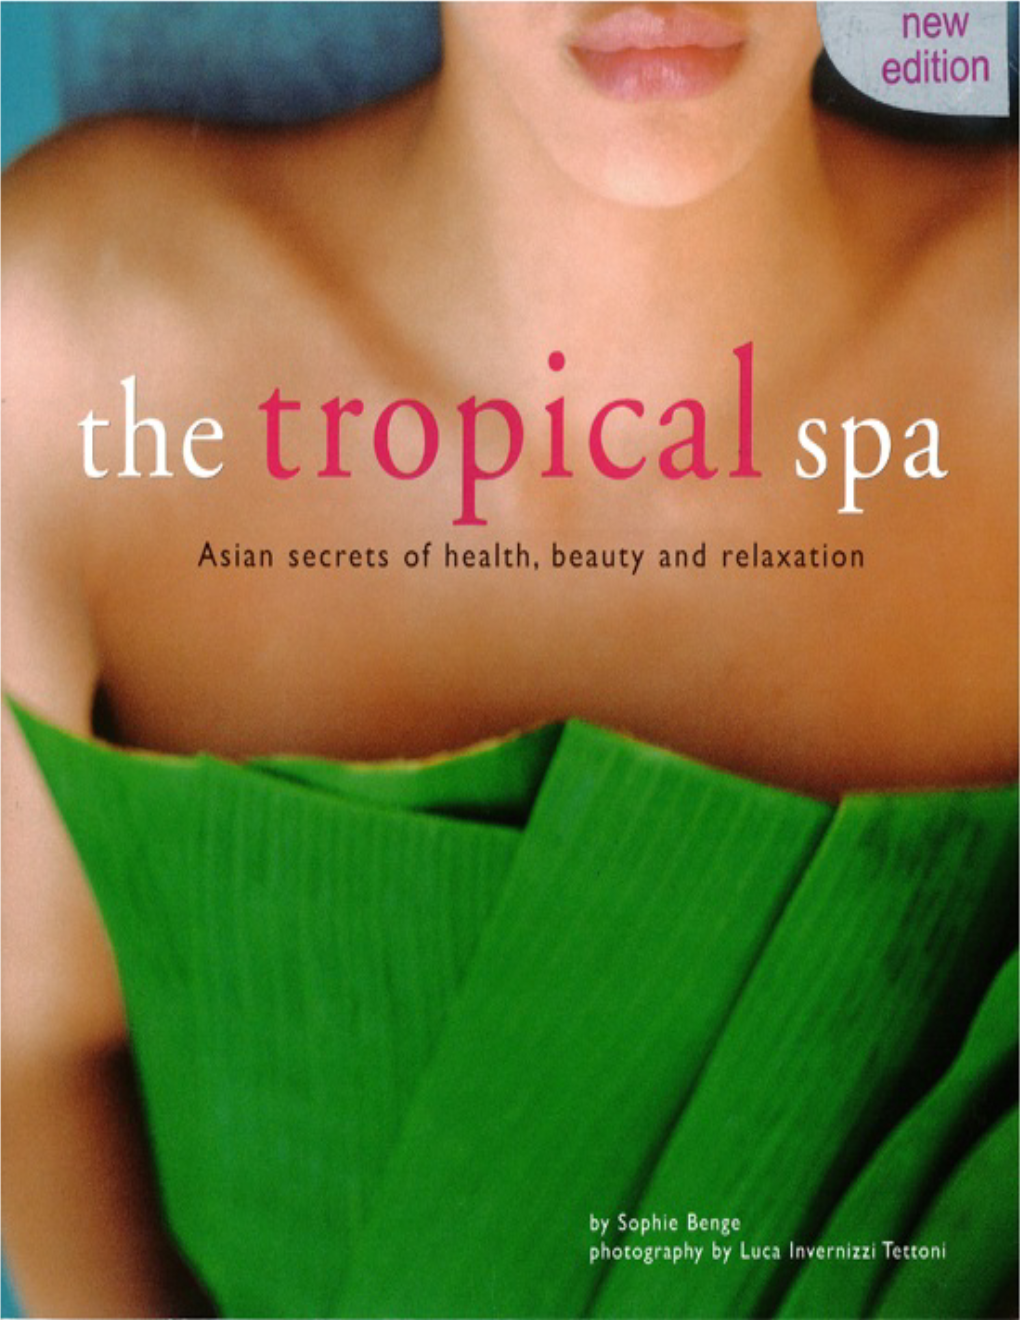 The Tropical Spa Asian Secrets of Health, Beauty and Relaxation